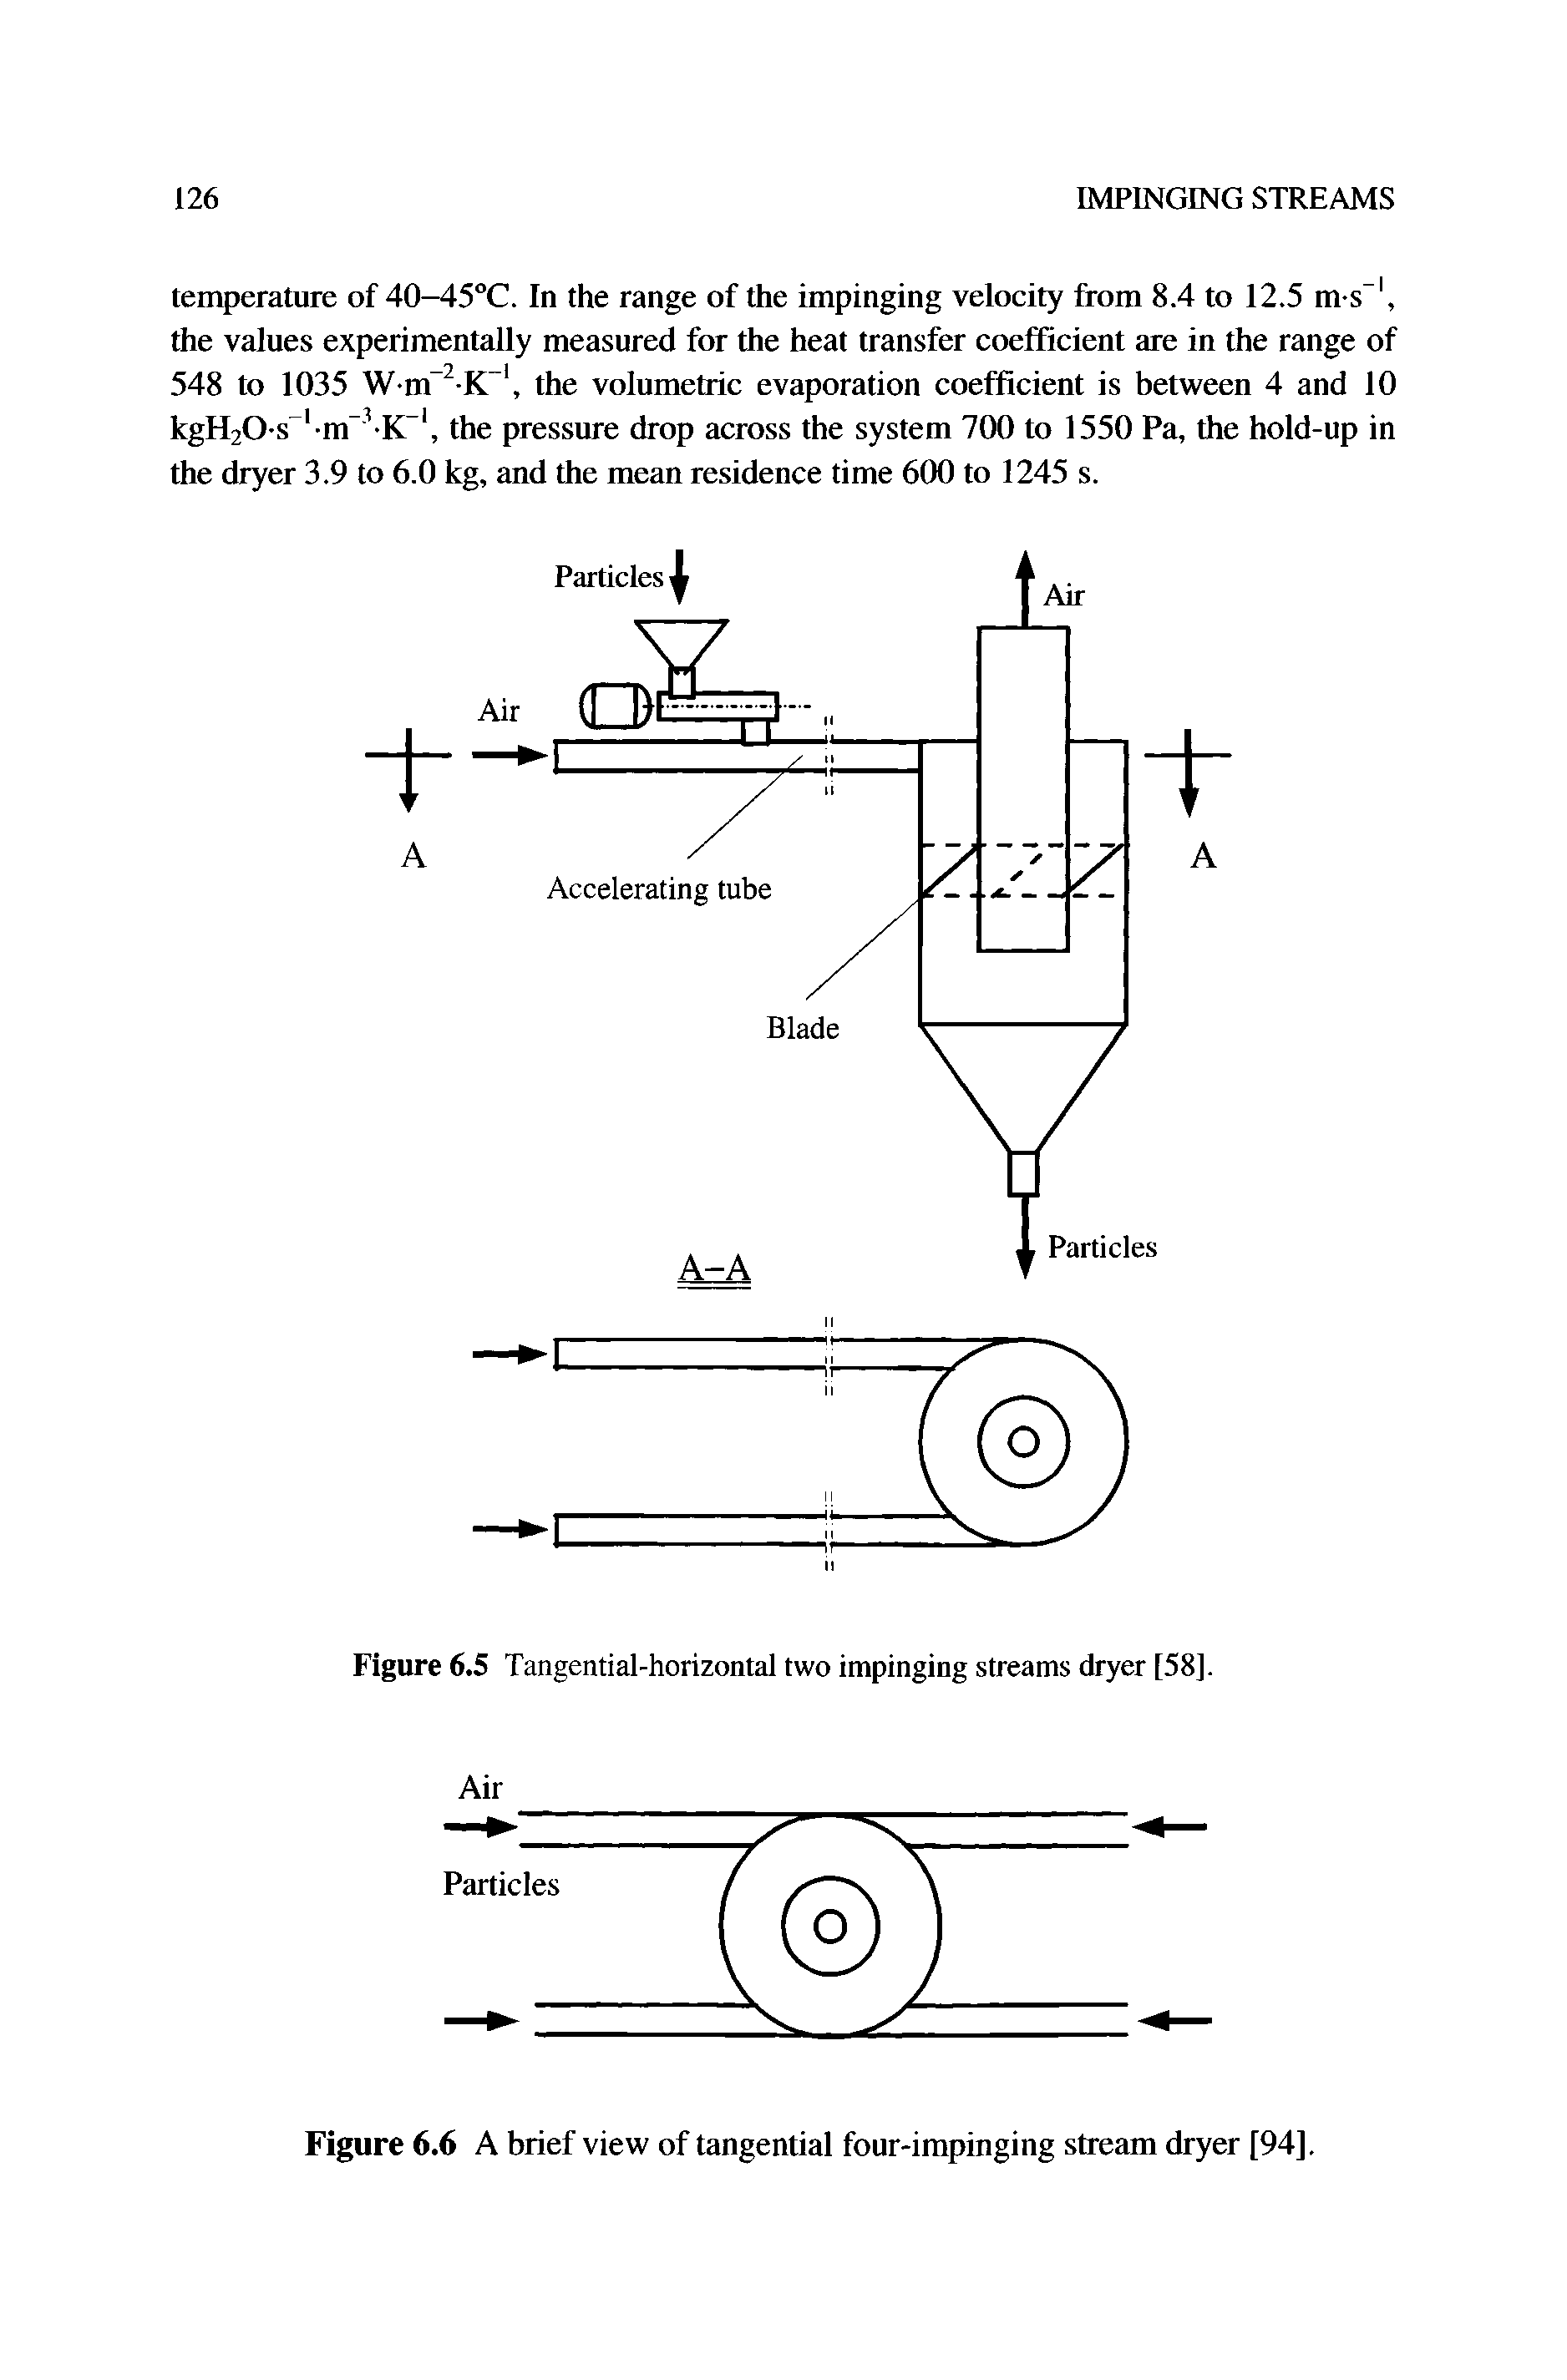 Figure 6.5 Tangential-horizontal two impinging streams dryer [58].